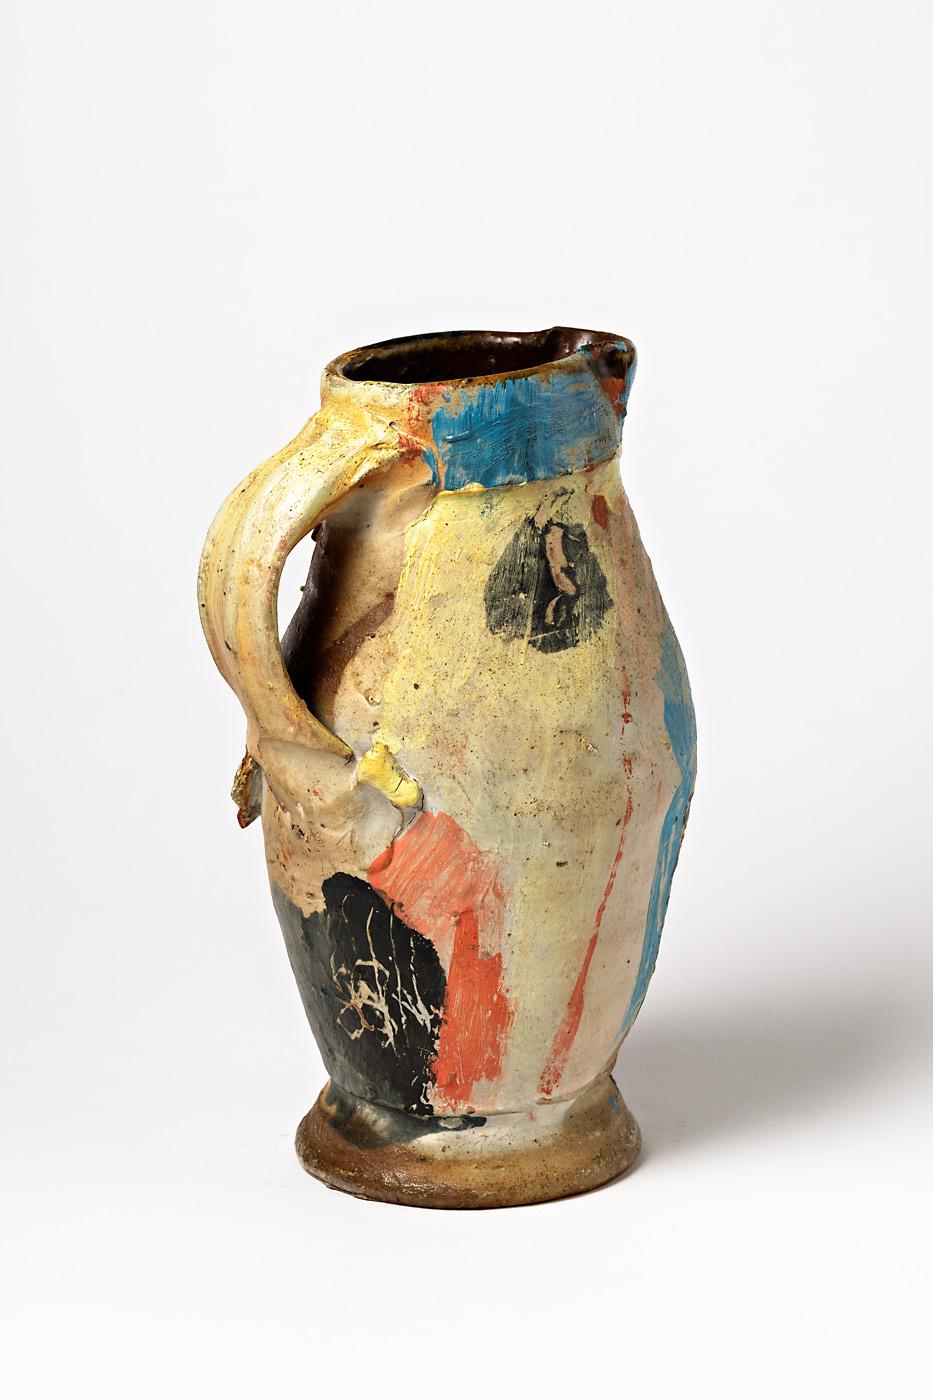 Claude Varlan (born in 1940).

Rare colored ceramic pitcher.

Abtract painted on a stoneware pottery pitcher or vase.

Excellent original conditions.

Dimensions: 27 x 16 x 12cm.